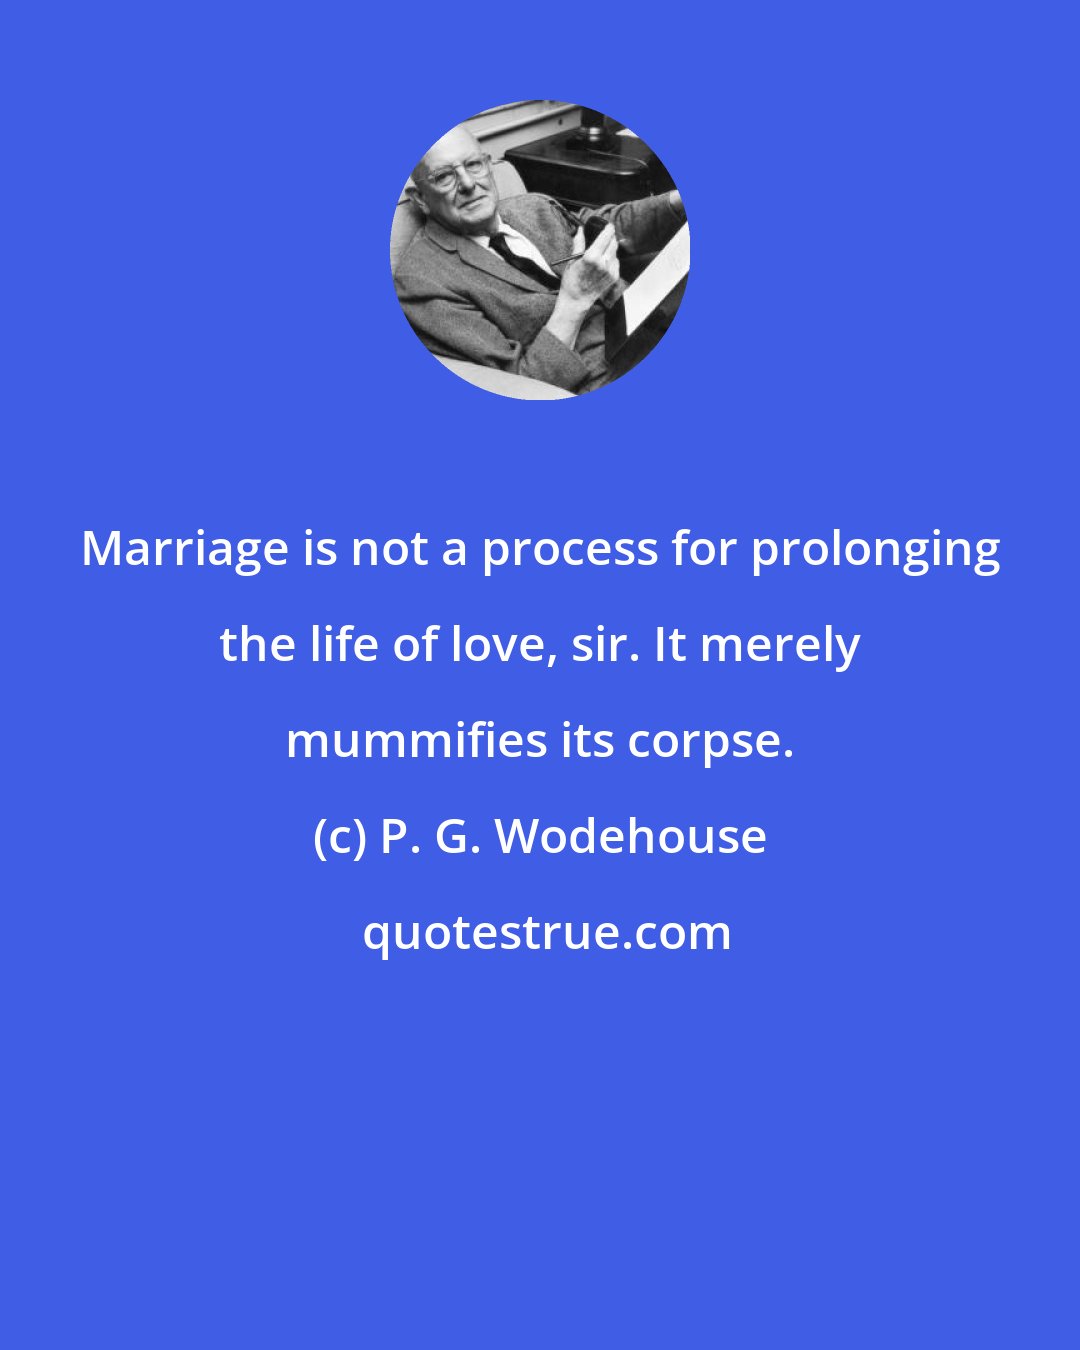 P. G. Wodehouse: Marriage is not a process for prolonging the life of love, sir. It merely mummifies its corpse.